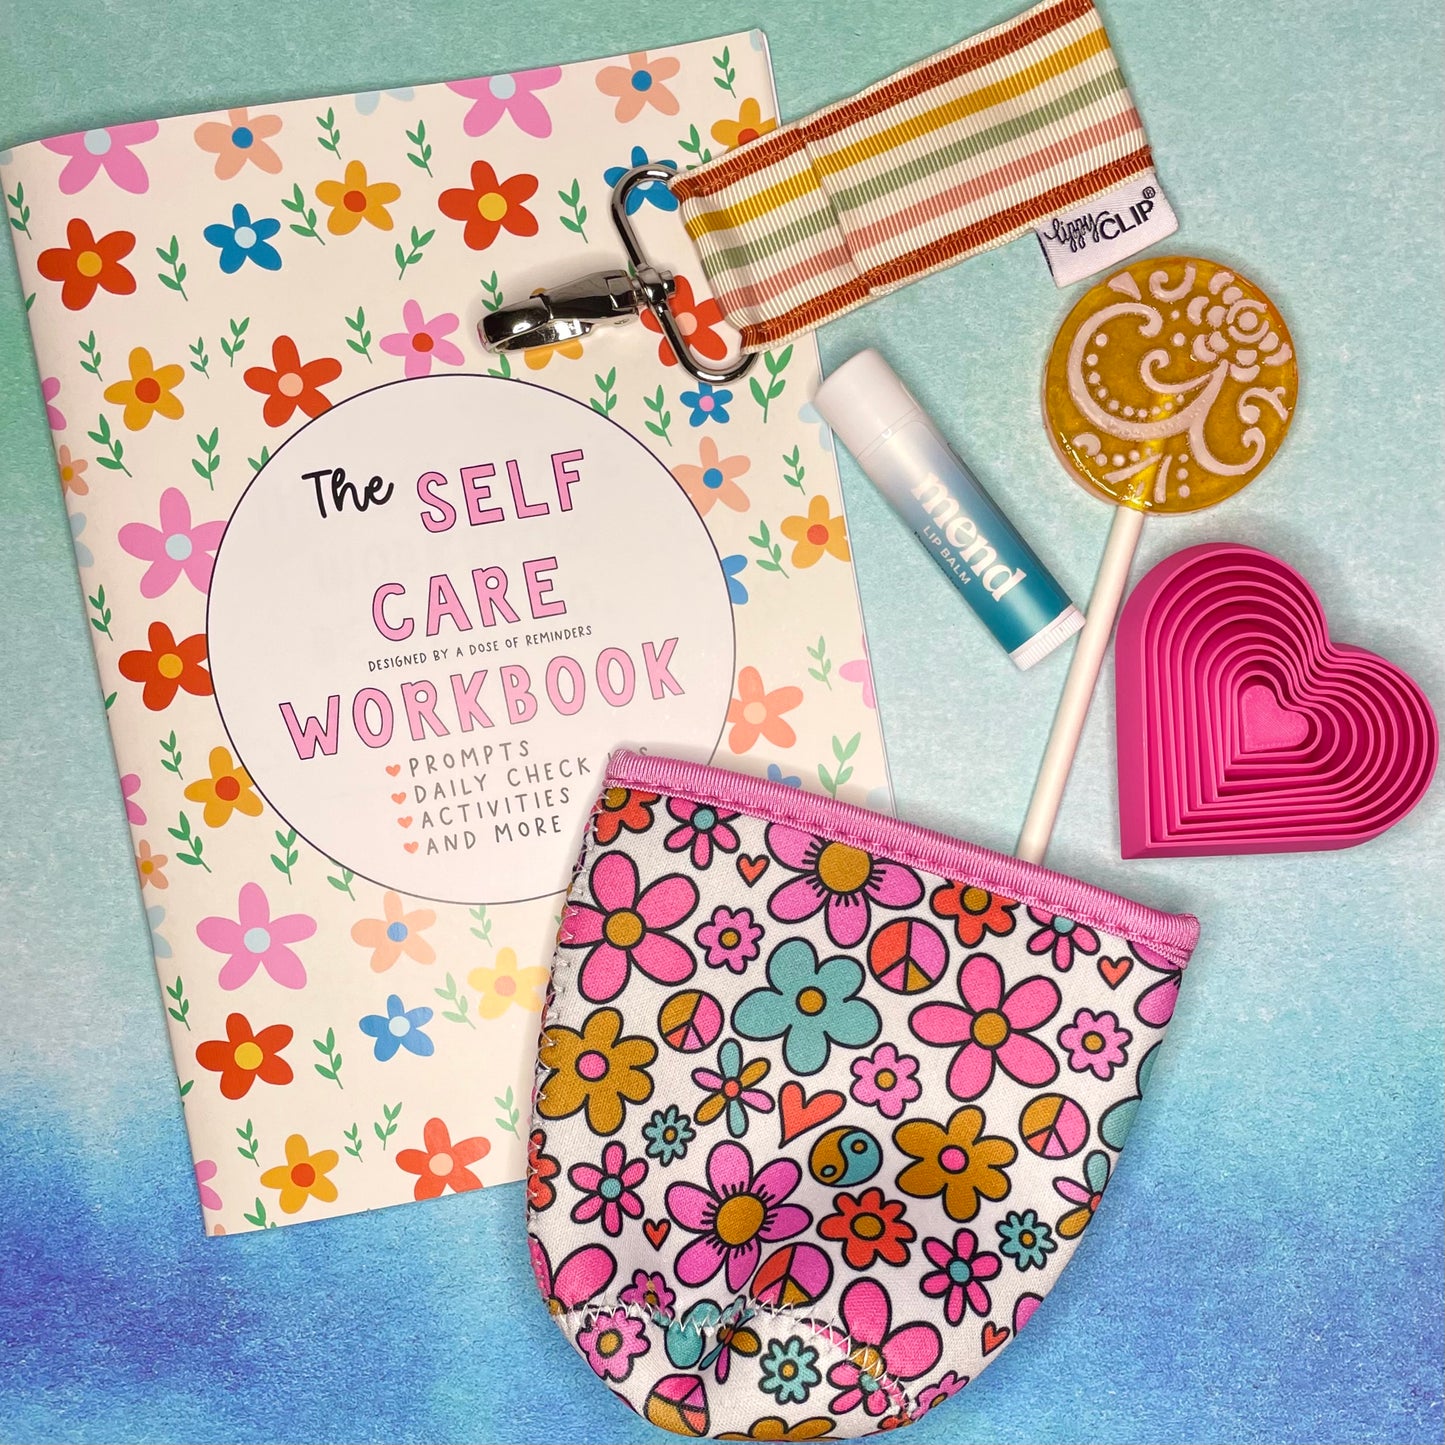 Spring Millions of Peaches Box featuring a self care workbook from A Dose of Reminders, Mend Lip Balm and a Lippy Clip to keep it handy, heart shaped fidget toy from Lauren Ann Designs, a mango flavored lollipop, and a coffee cozy from Elle Nicole